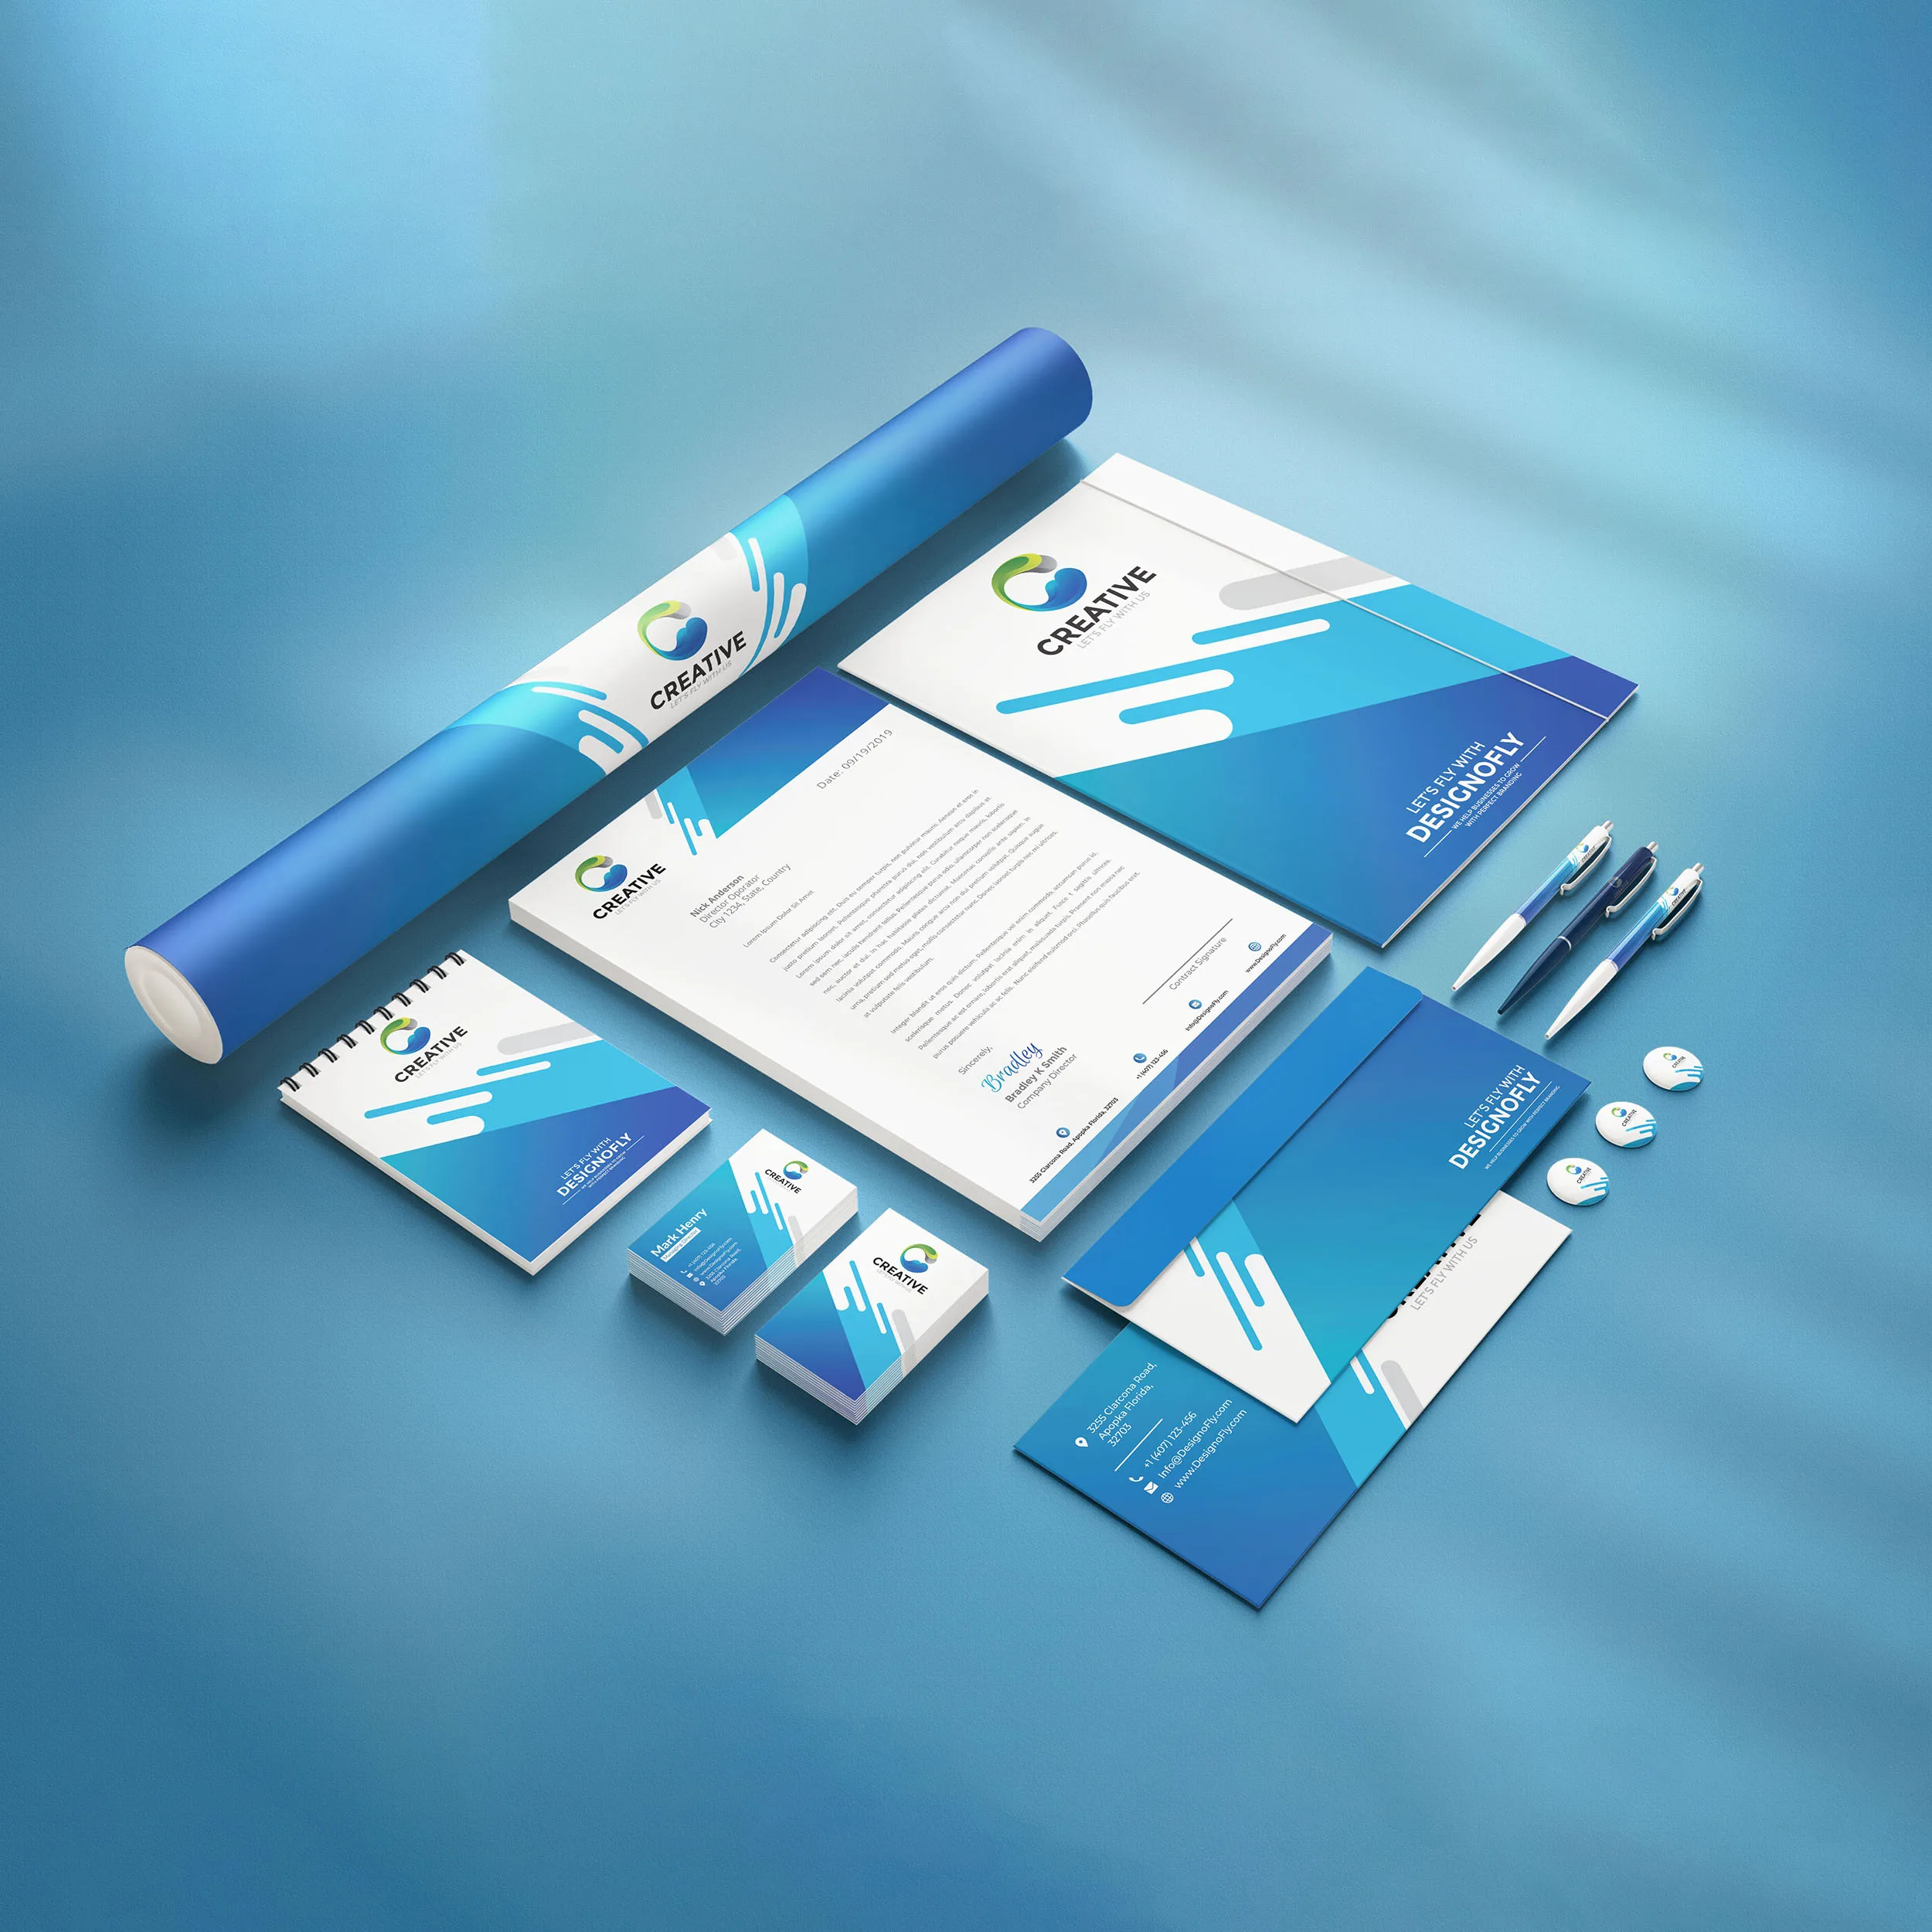 Business card, letterhead and stationery branding design